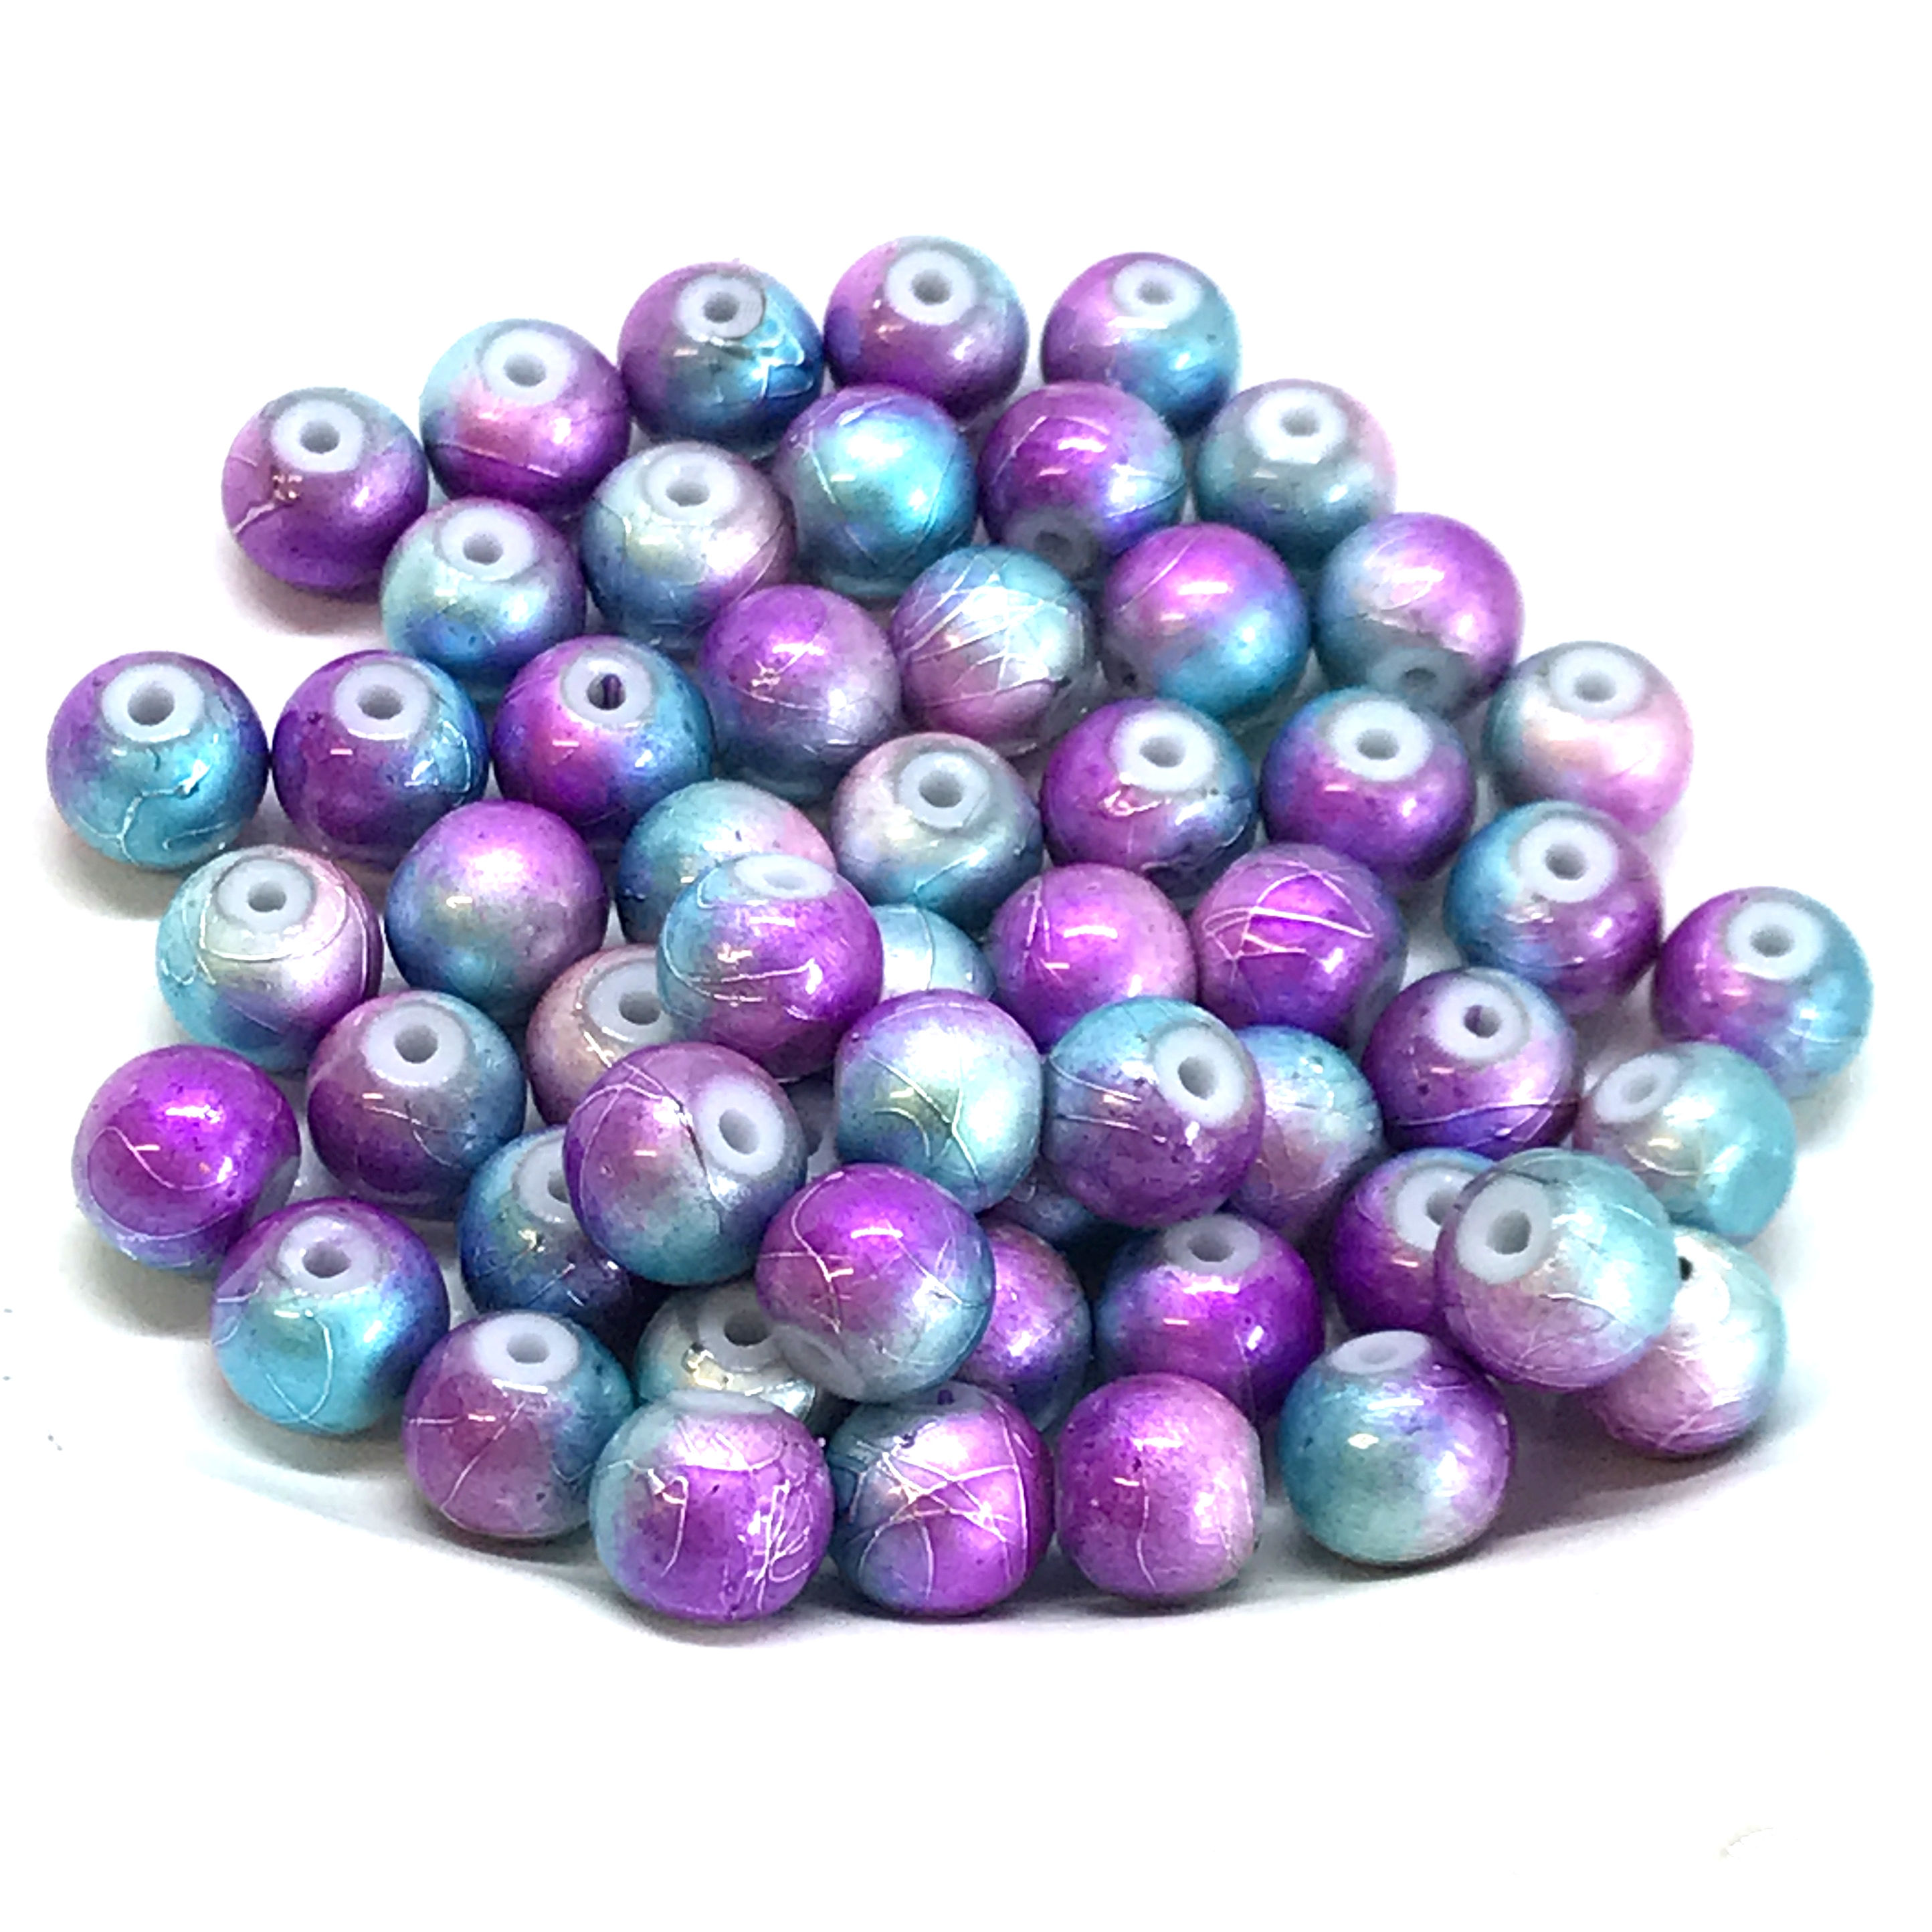 colorful beads